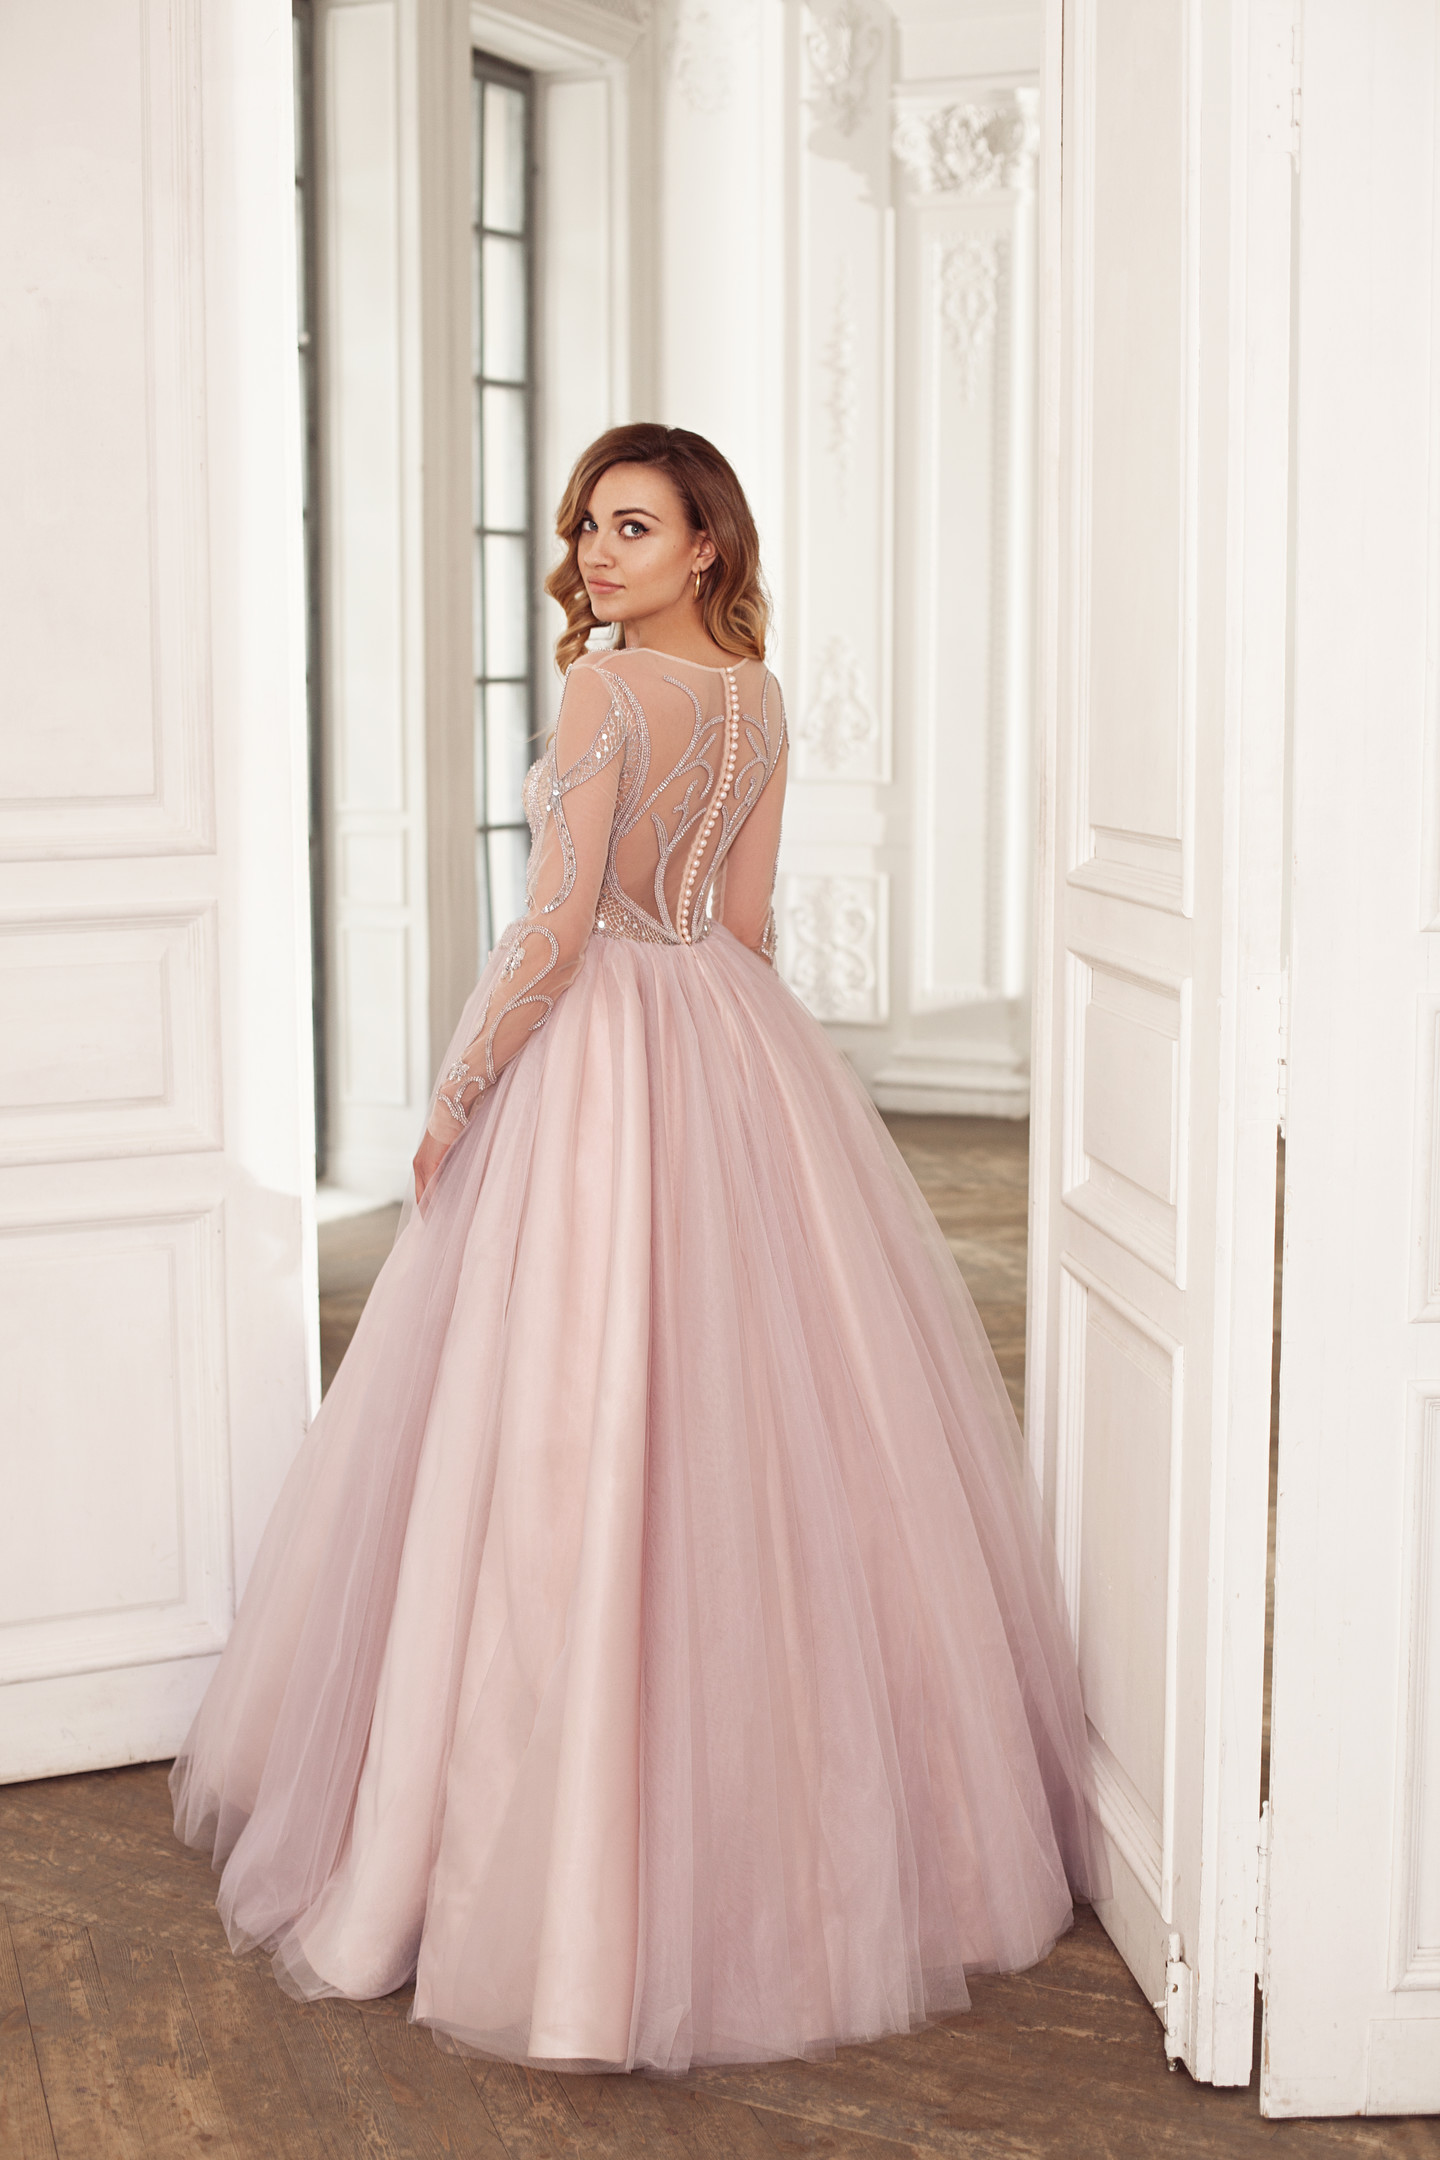 Melanie gown, 2018, couture, dress, evening, pink, tulle, embroidery, A-line, bridal, sleeves, archive